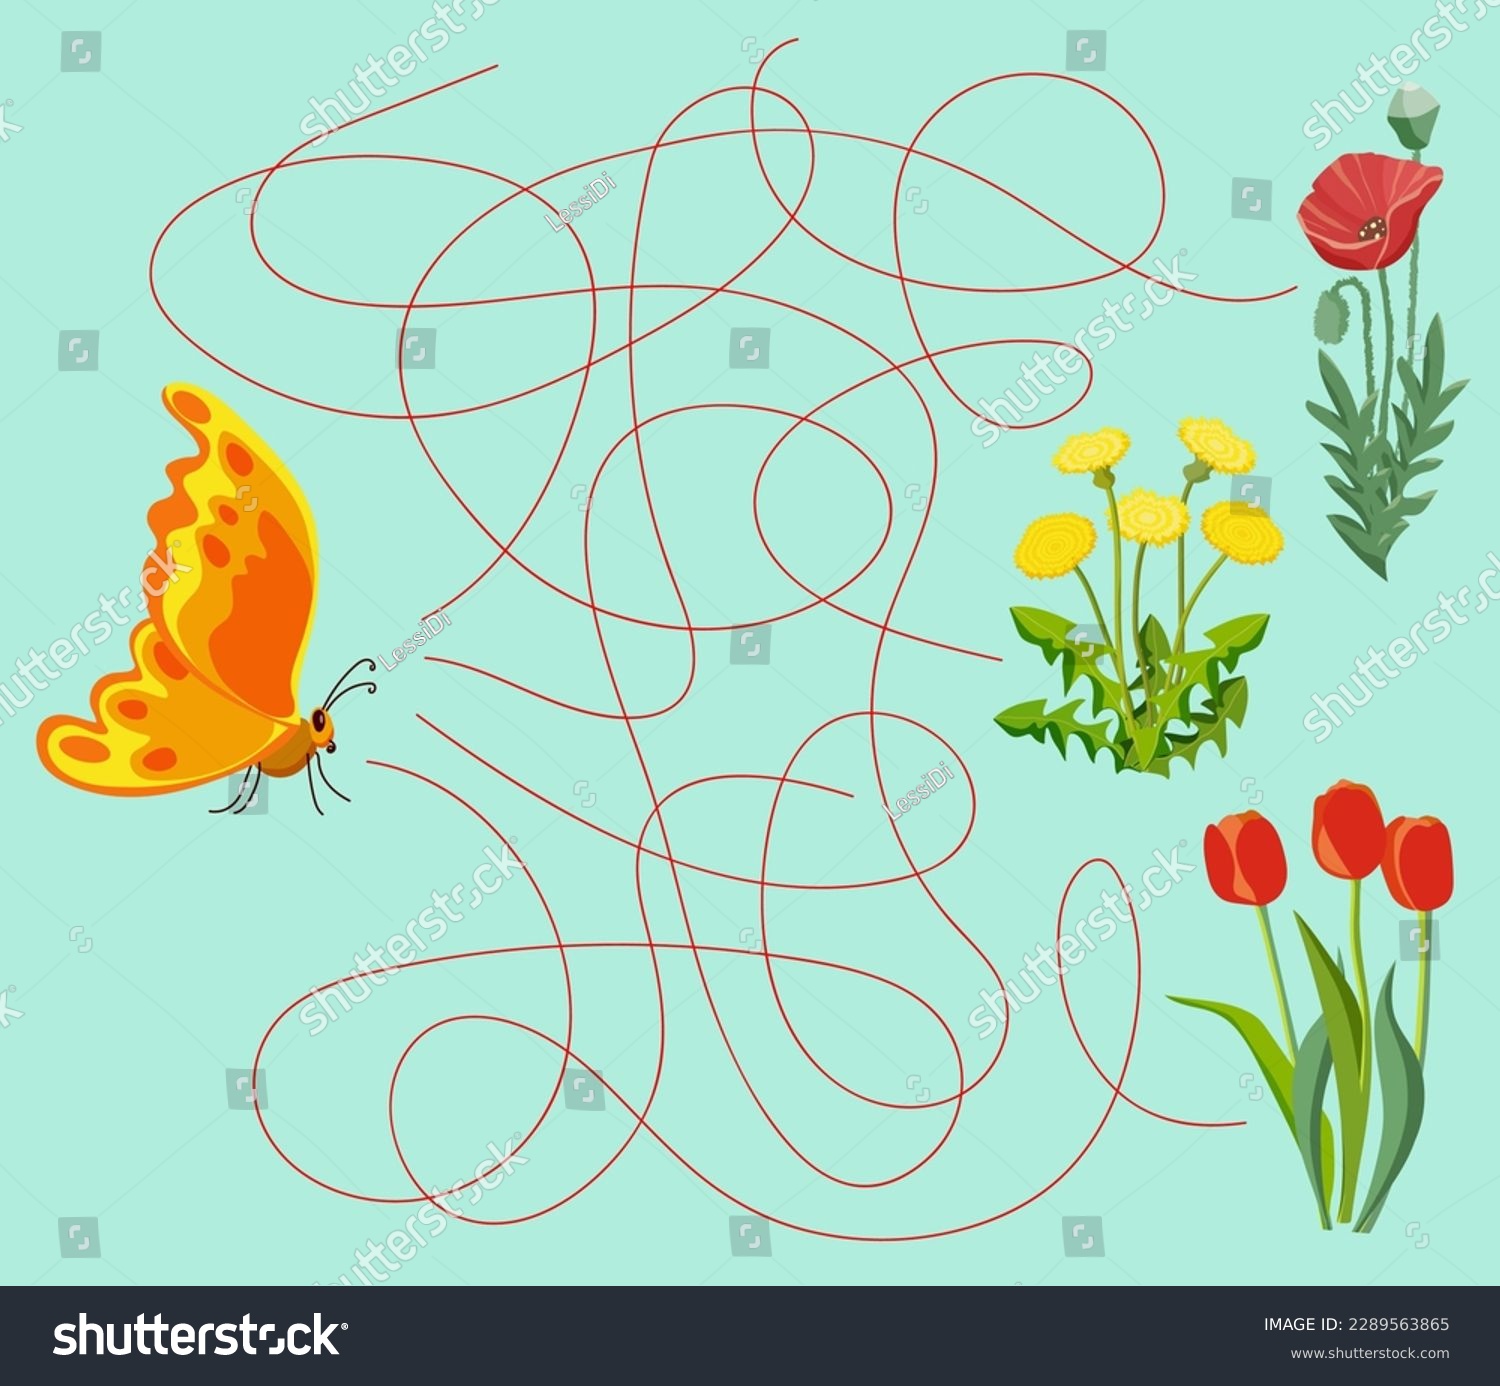 SVG of Maze educational game. Find which flower the orange butterfly will go to. Cartoon vector illustration for children's entertainment. svg